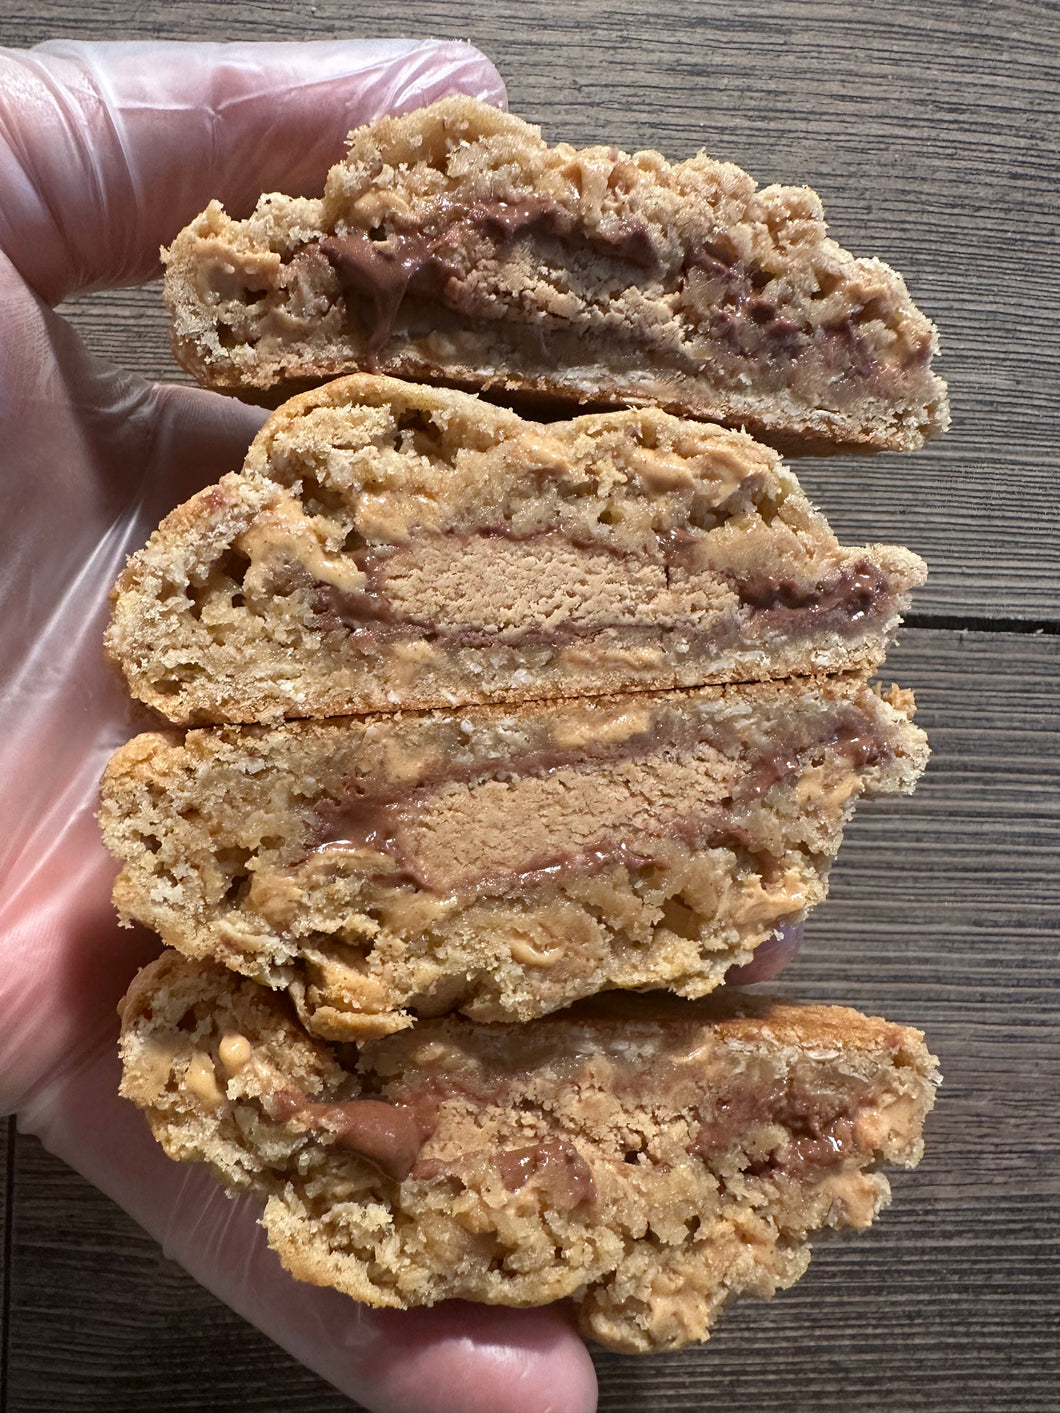 T-OAT-ally Awesome Peanut Butter Cup Cookies (12 Half Pack)